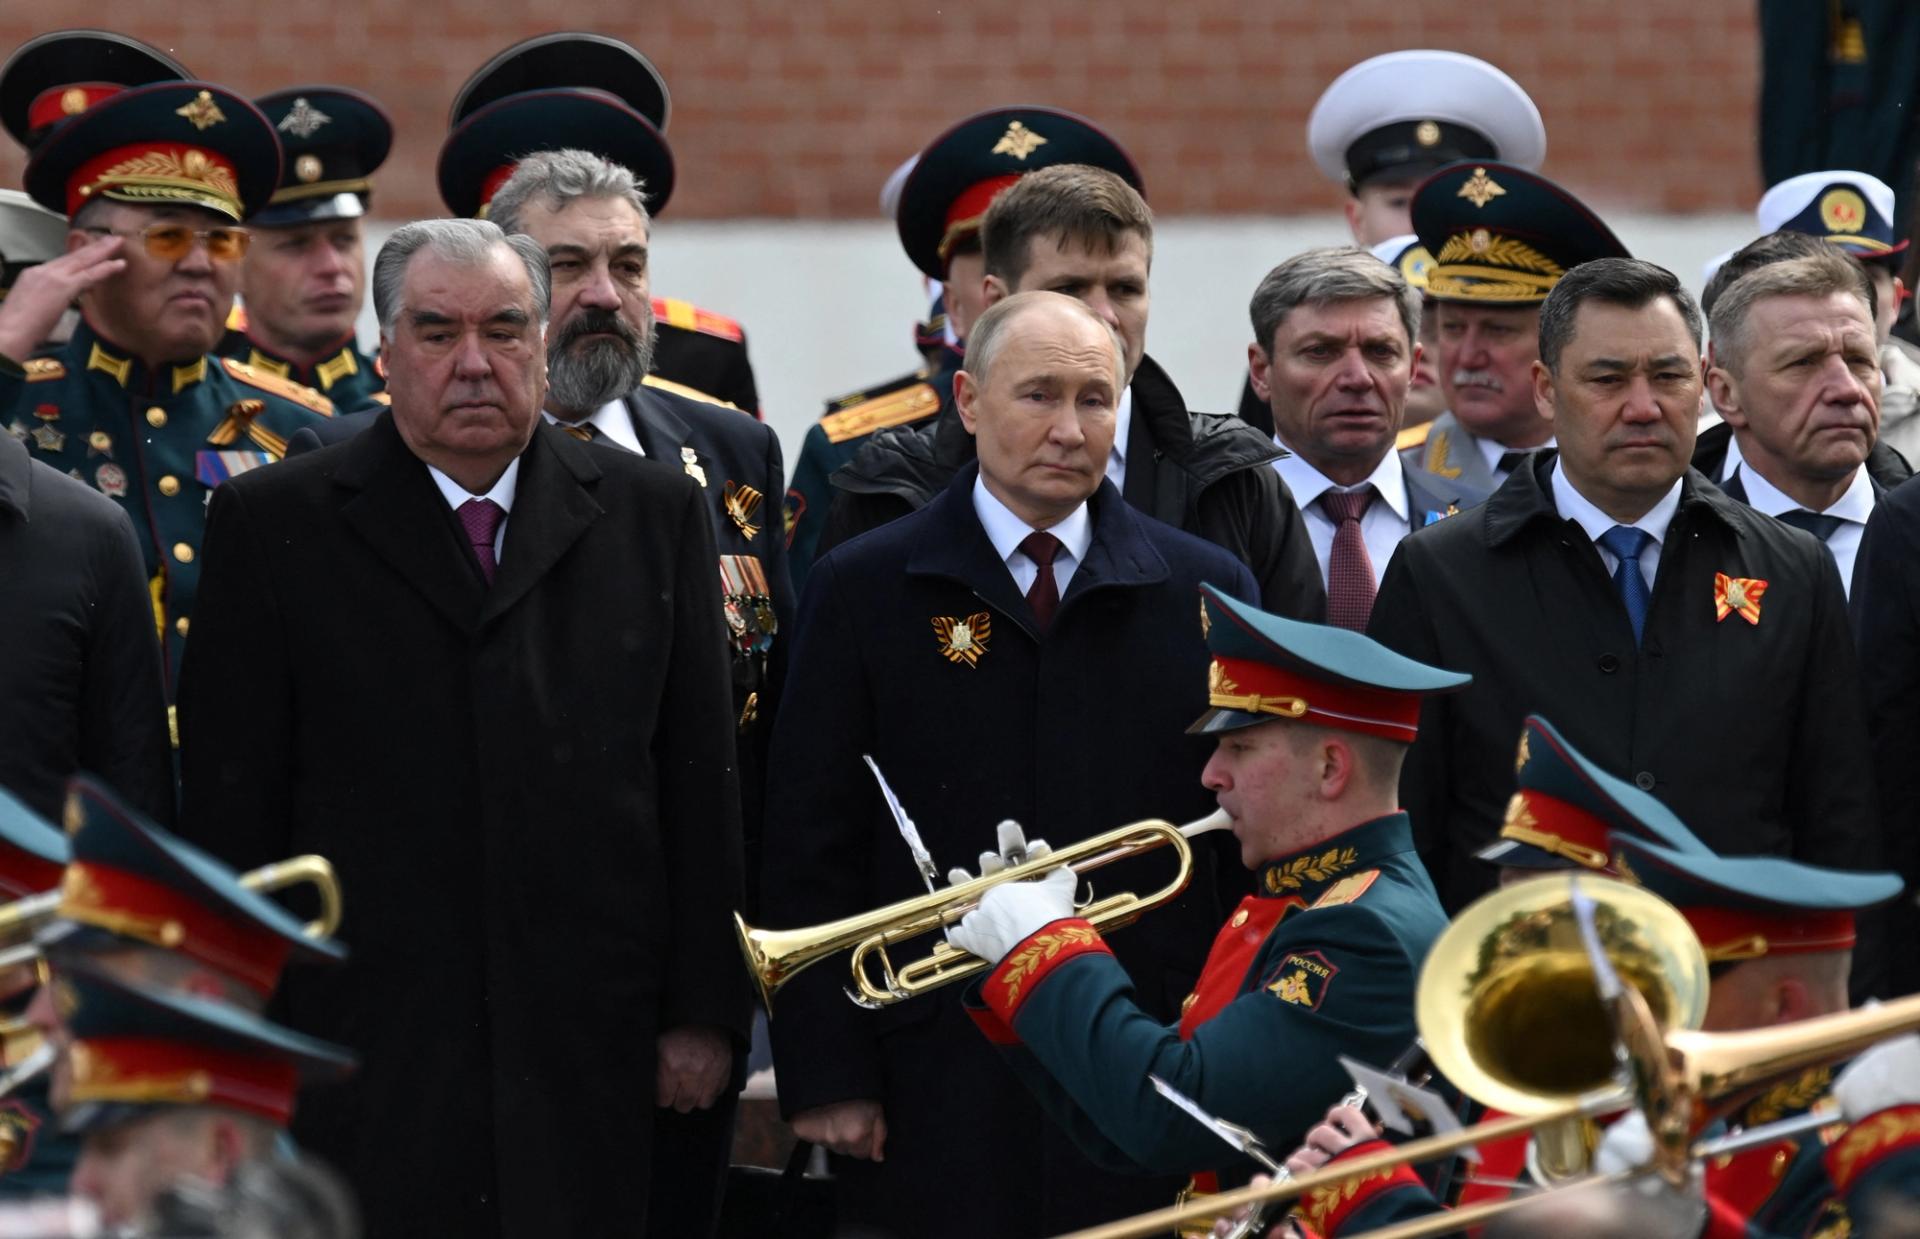 Tajik President Emomali Rakhmon, Russian President Vladimir Putin and Kyrgyz President Sadyr Japarov take part in a flower-laying ceremony at the Tomb of the Unknown Soldier on Victory Day, which marks the 79th anniversary of the victory over Nazi Germany in World War Two, in central Moscow, Russia, May 9, 2024. Sputnik/Maxim Blinov